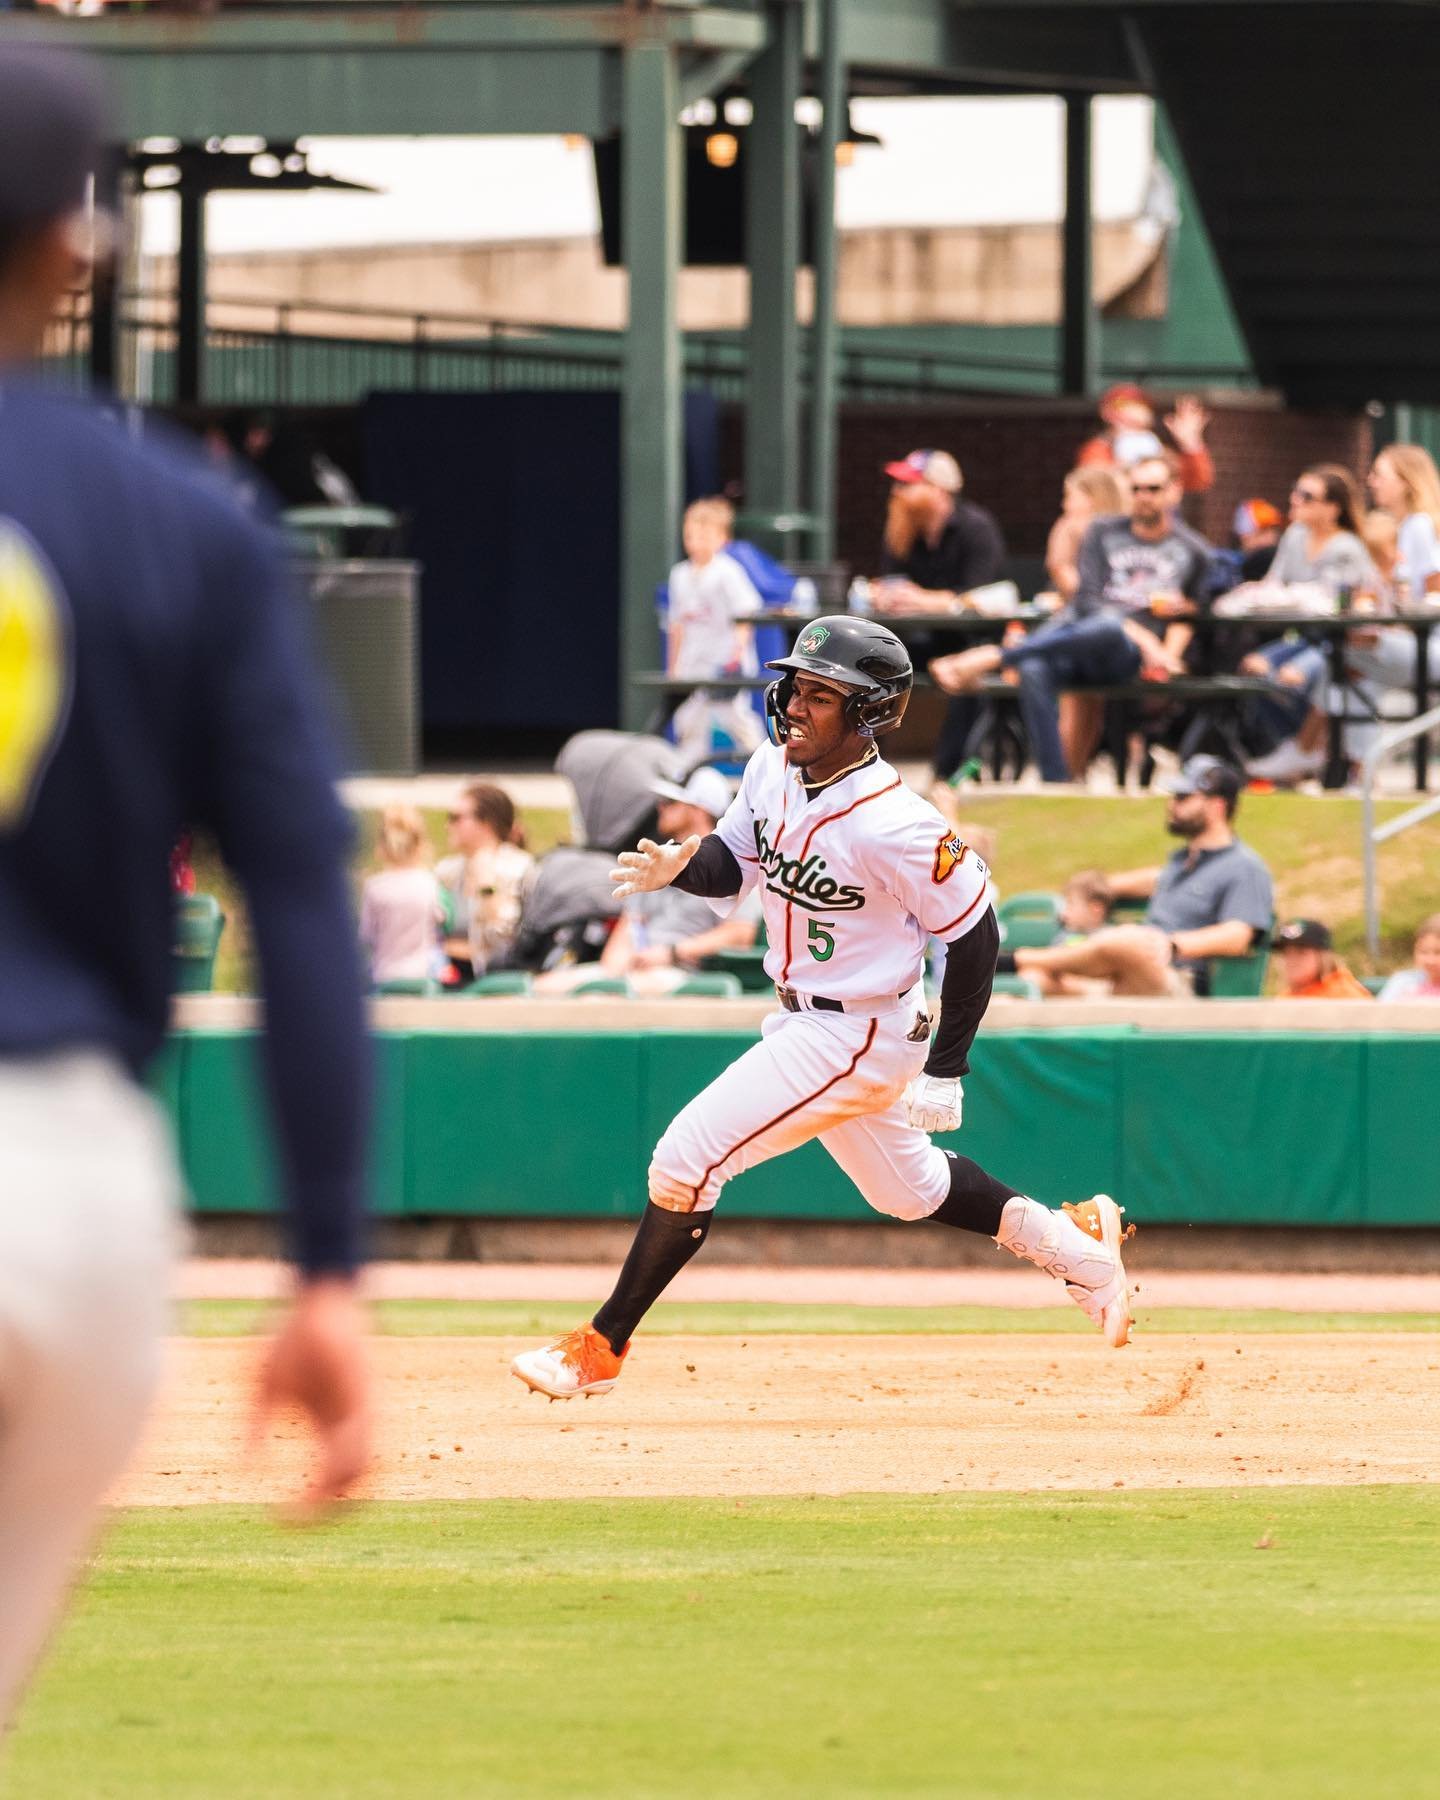 Recap frames from this past weekend with the @gowoodducks 🦆📸